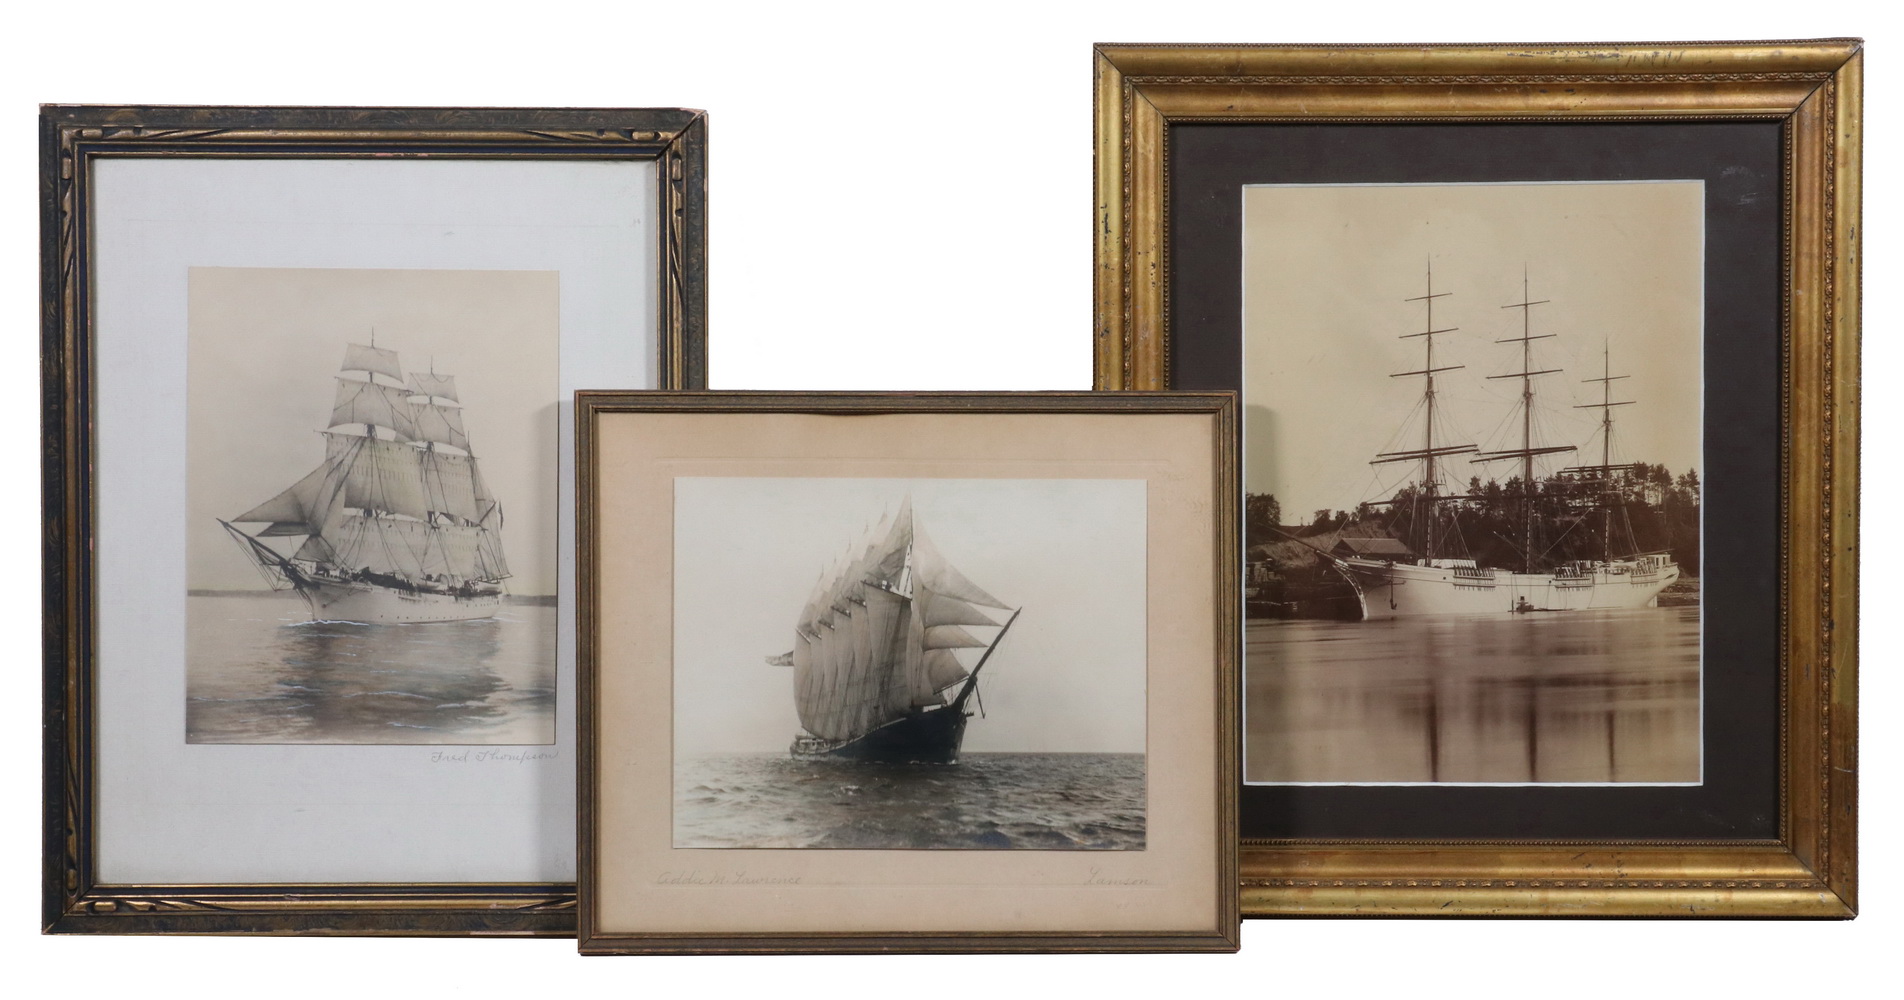  3 EARLY MAINE PHOTOGRAPHS OF 2b4775